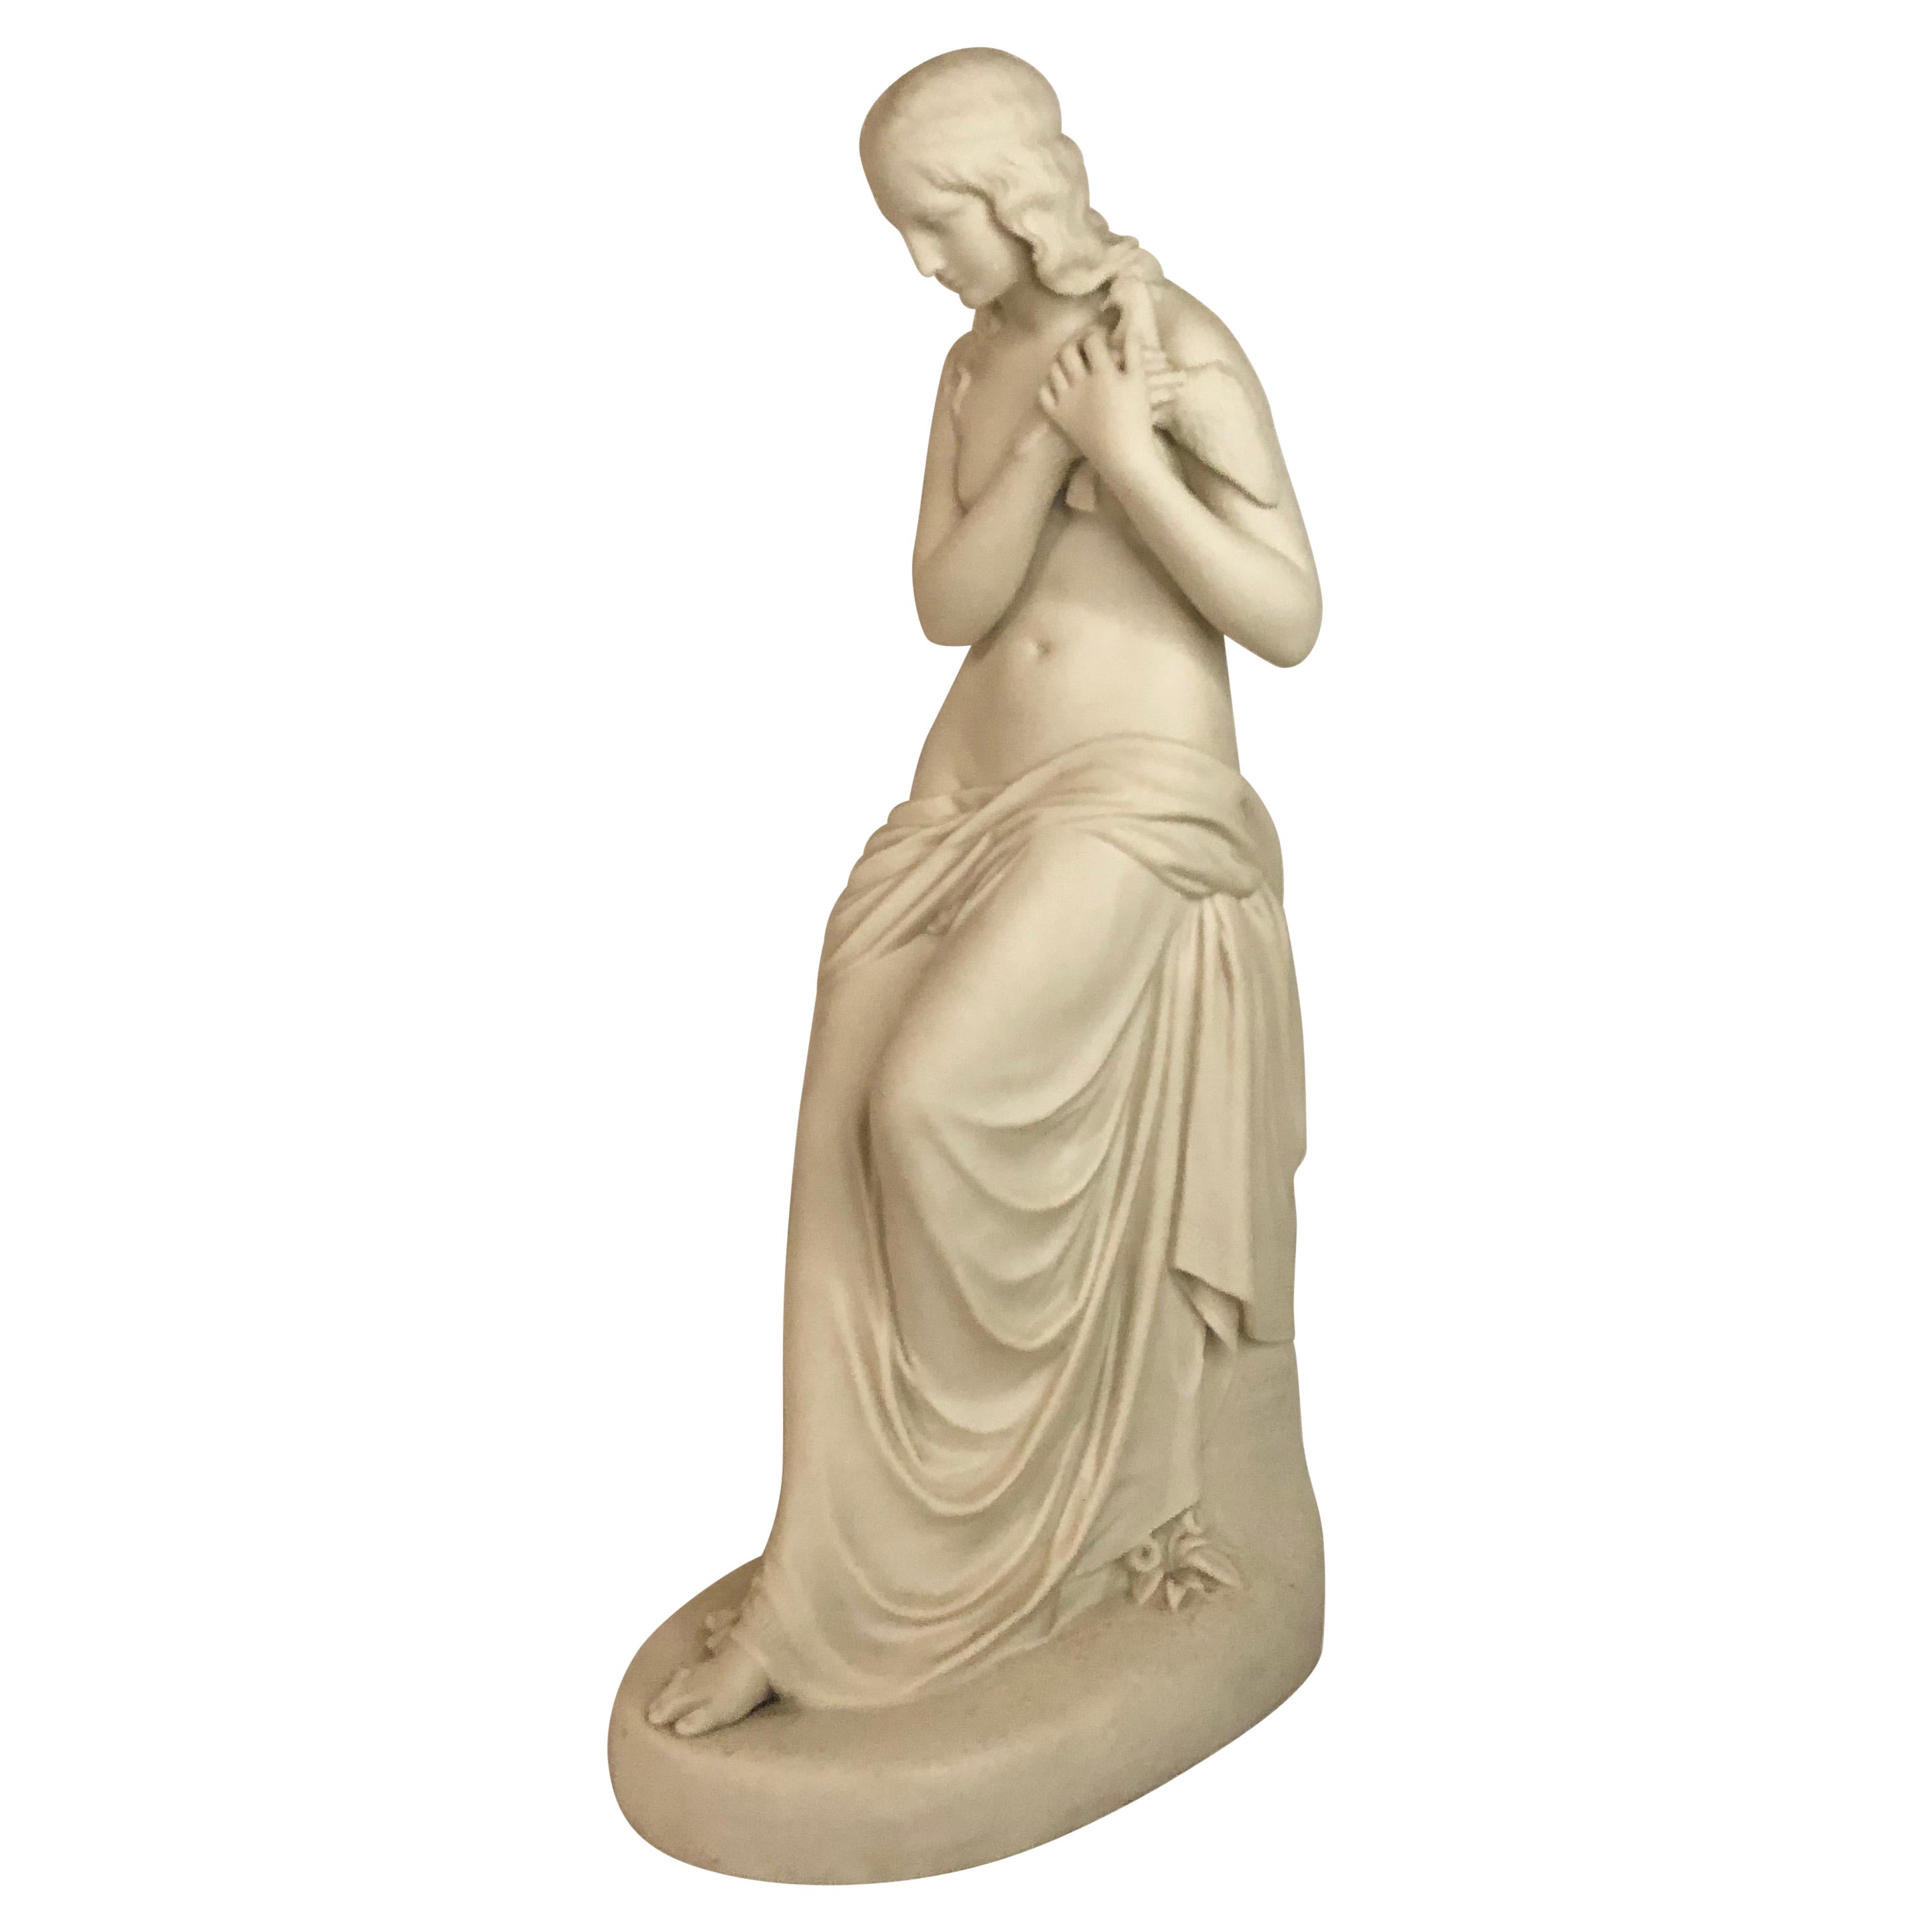 Tall Copeland Parian Figure of Exquisite Lady Named Innocence Holding a Bird